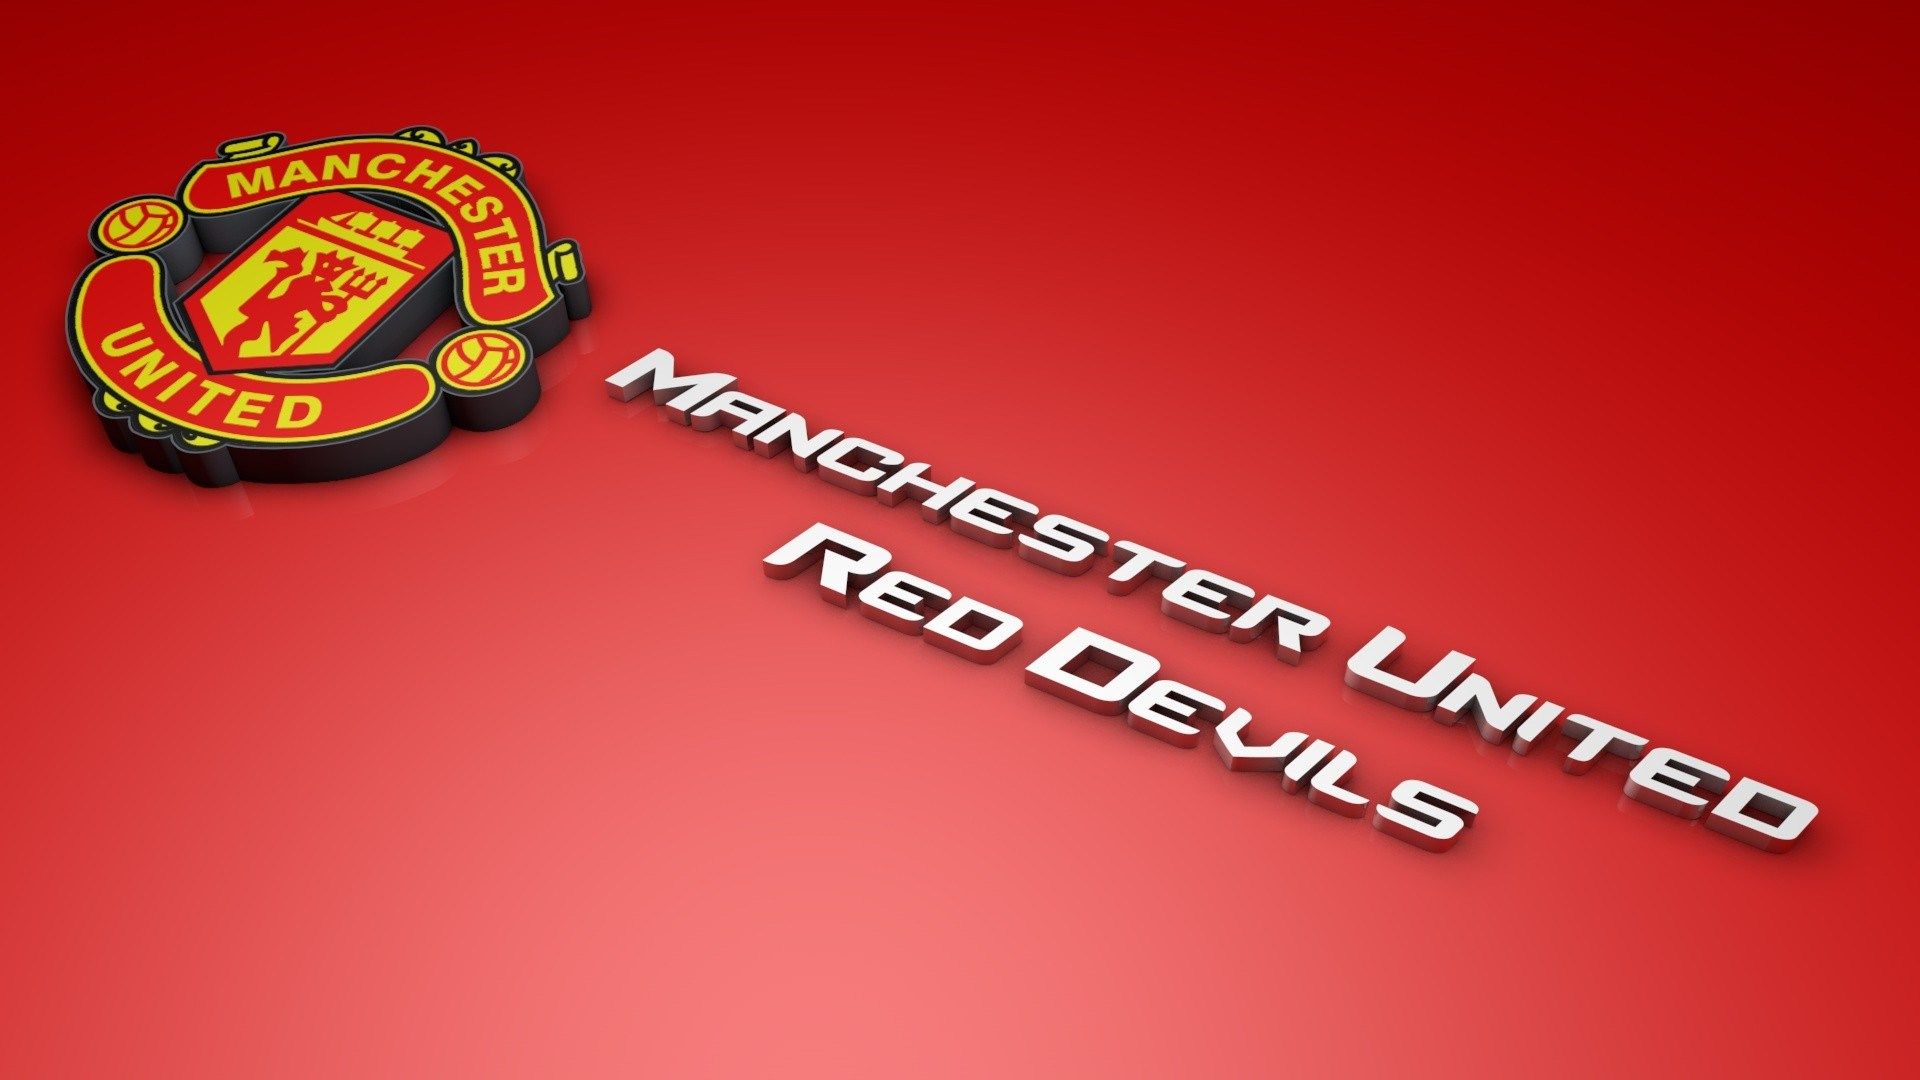 manchester united theme picture. Manchester united wallpaper, Manchester united image, Manchester united logo